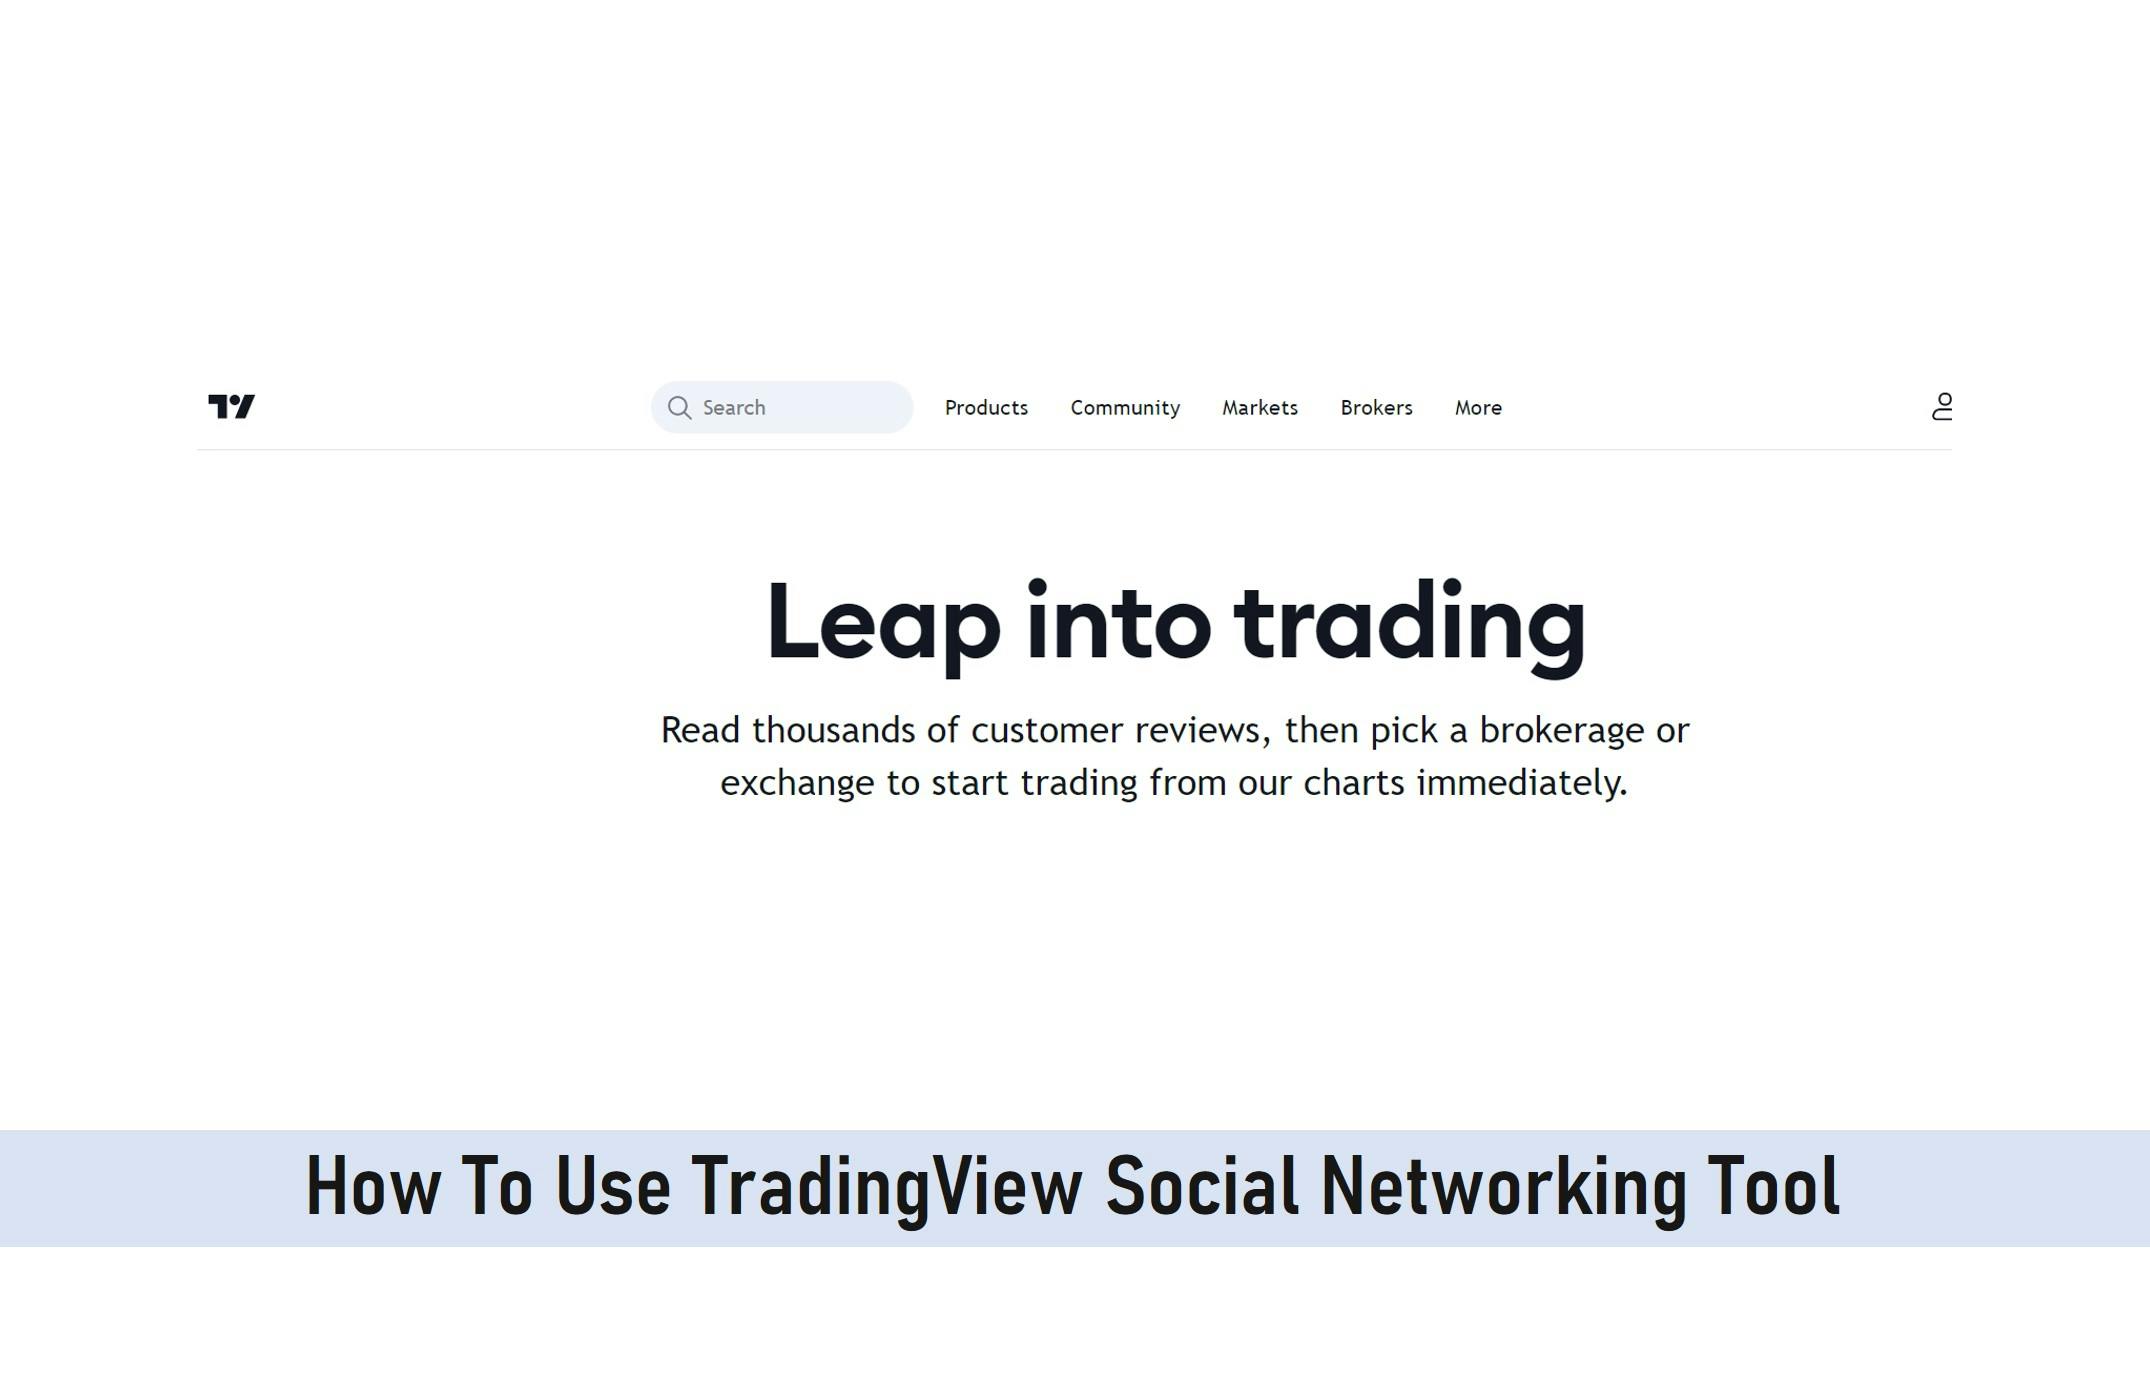 How To Use TradingView Social Networking Tool